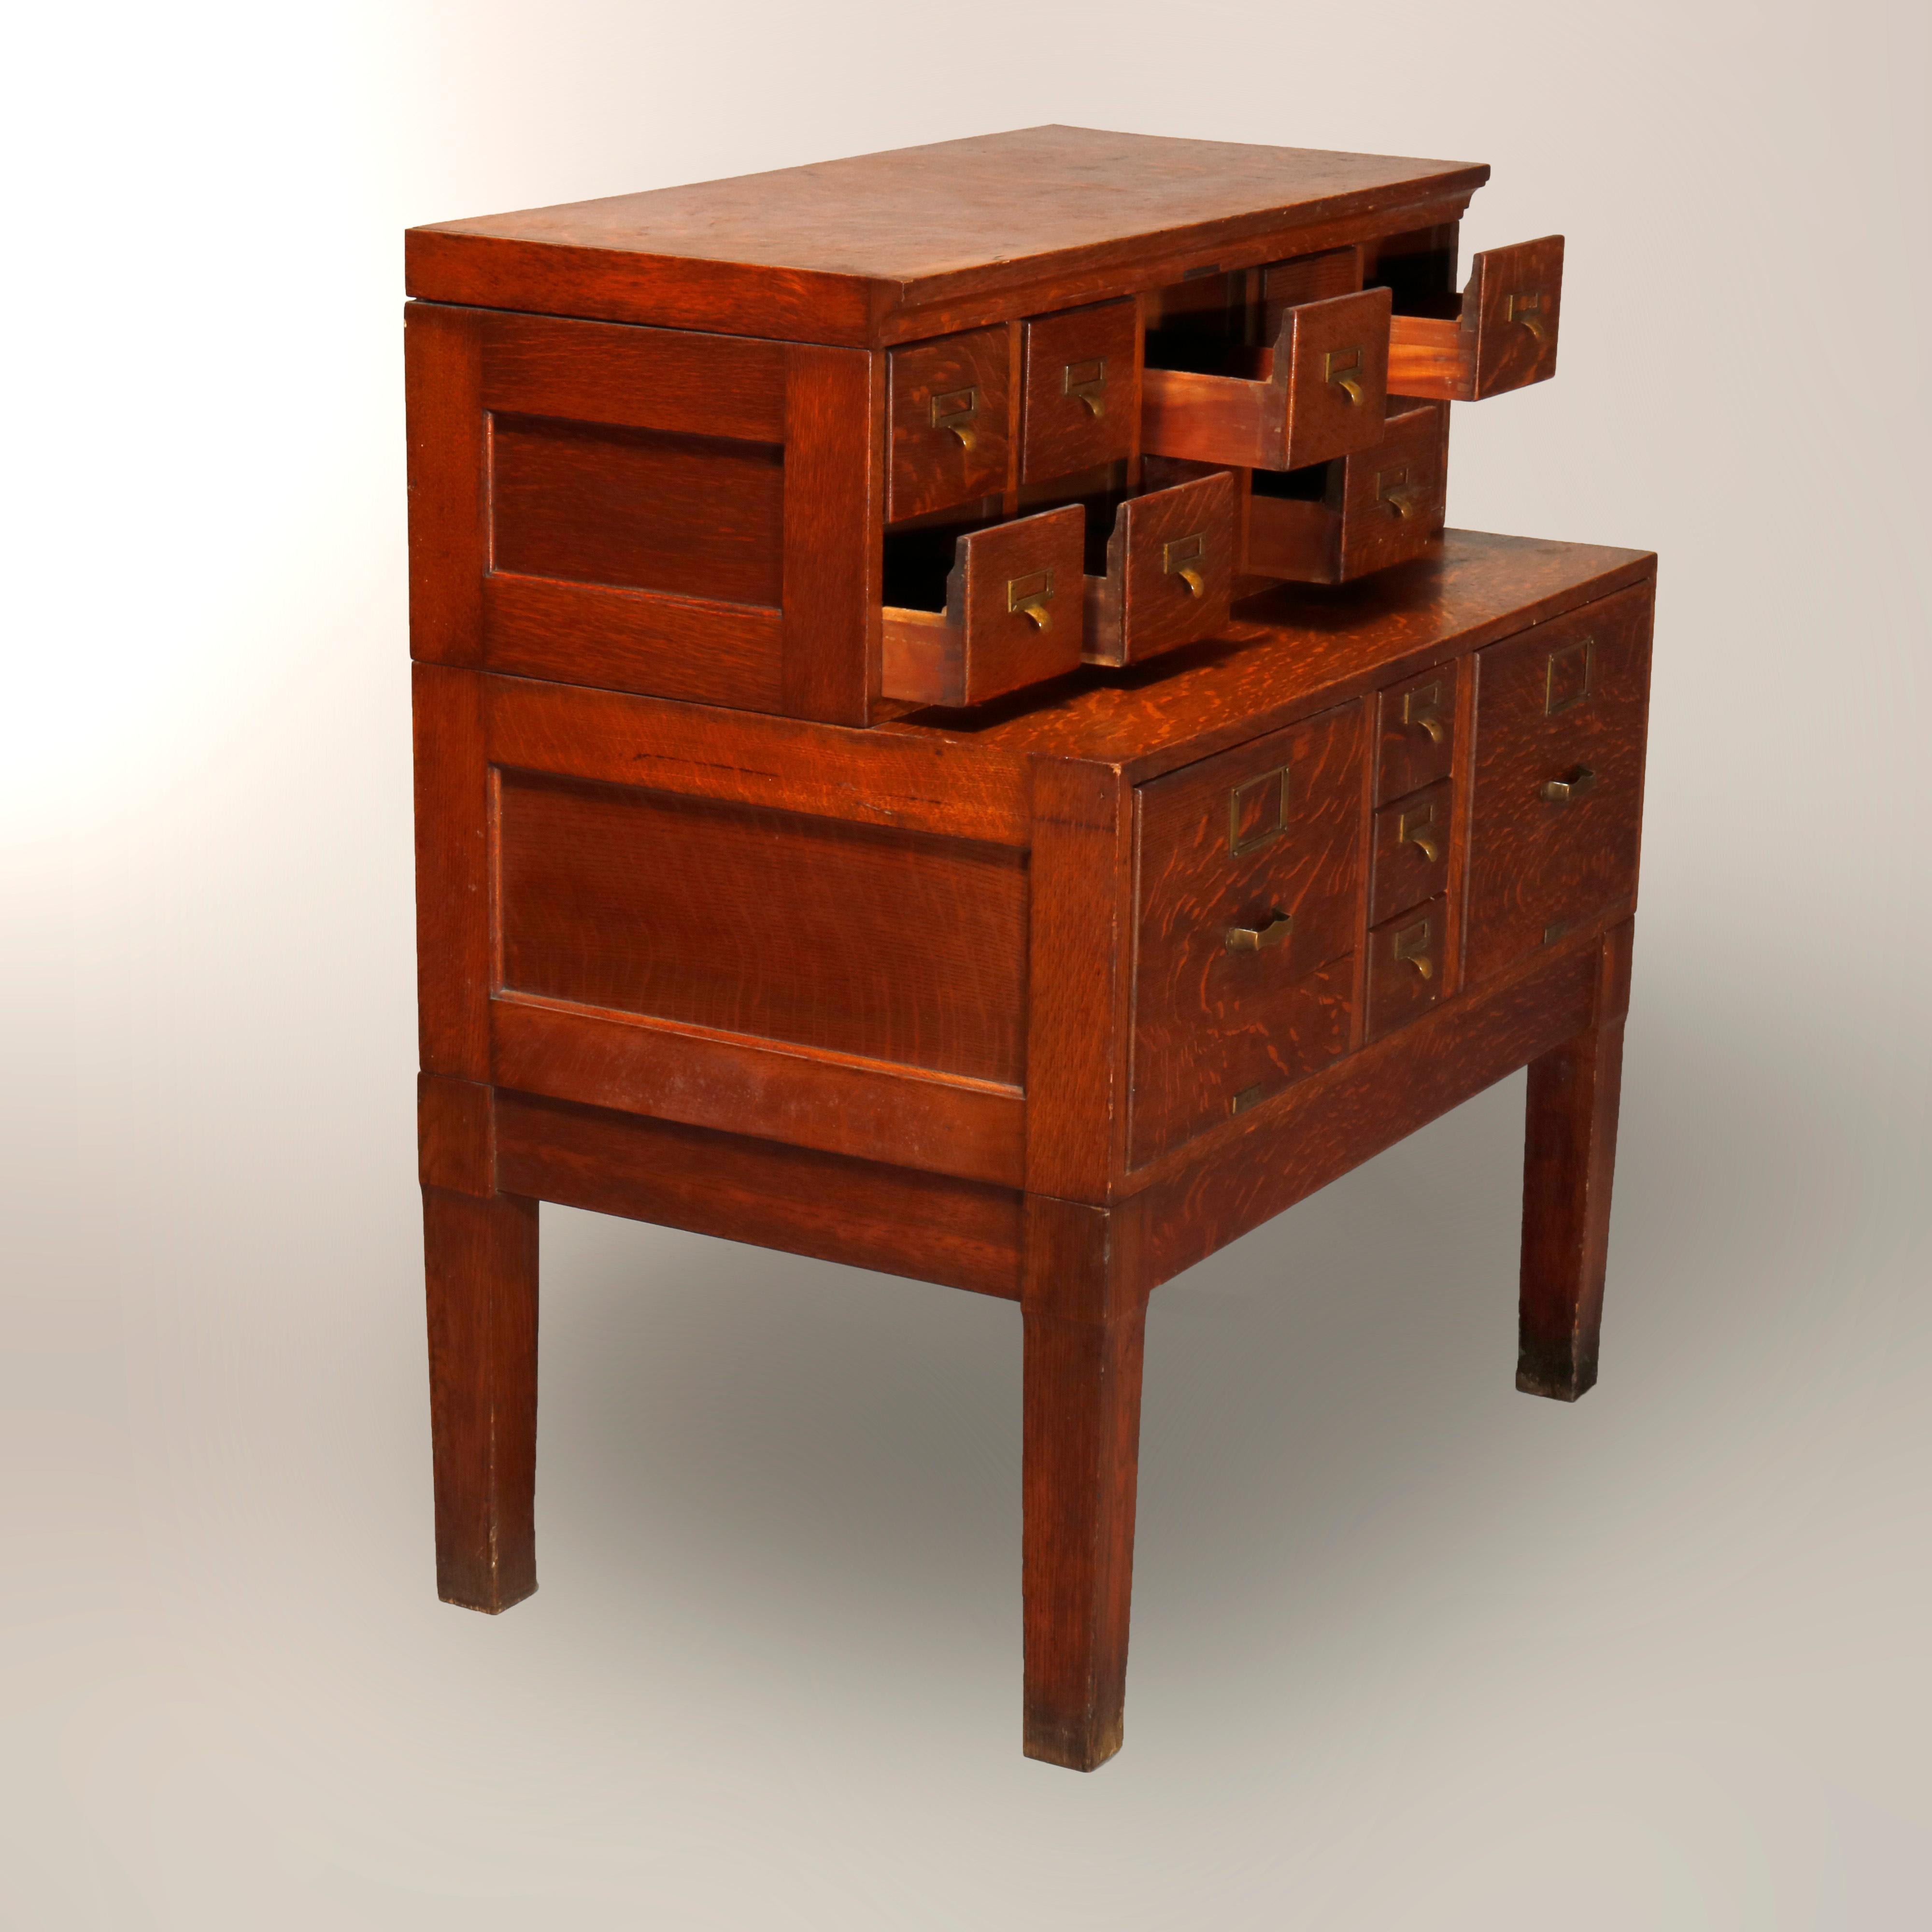 An antique Arts & Crafts library research card catalog filing cabinet offers paneled oak construction with stacked units having an upper with ten small drawers and lower with centra tower of three smaller drawers flanked by standard fining drawers,